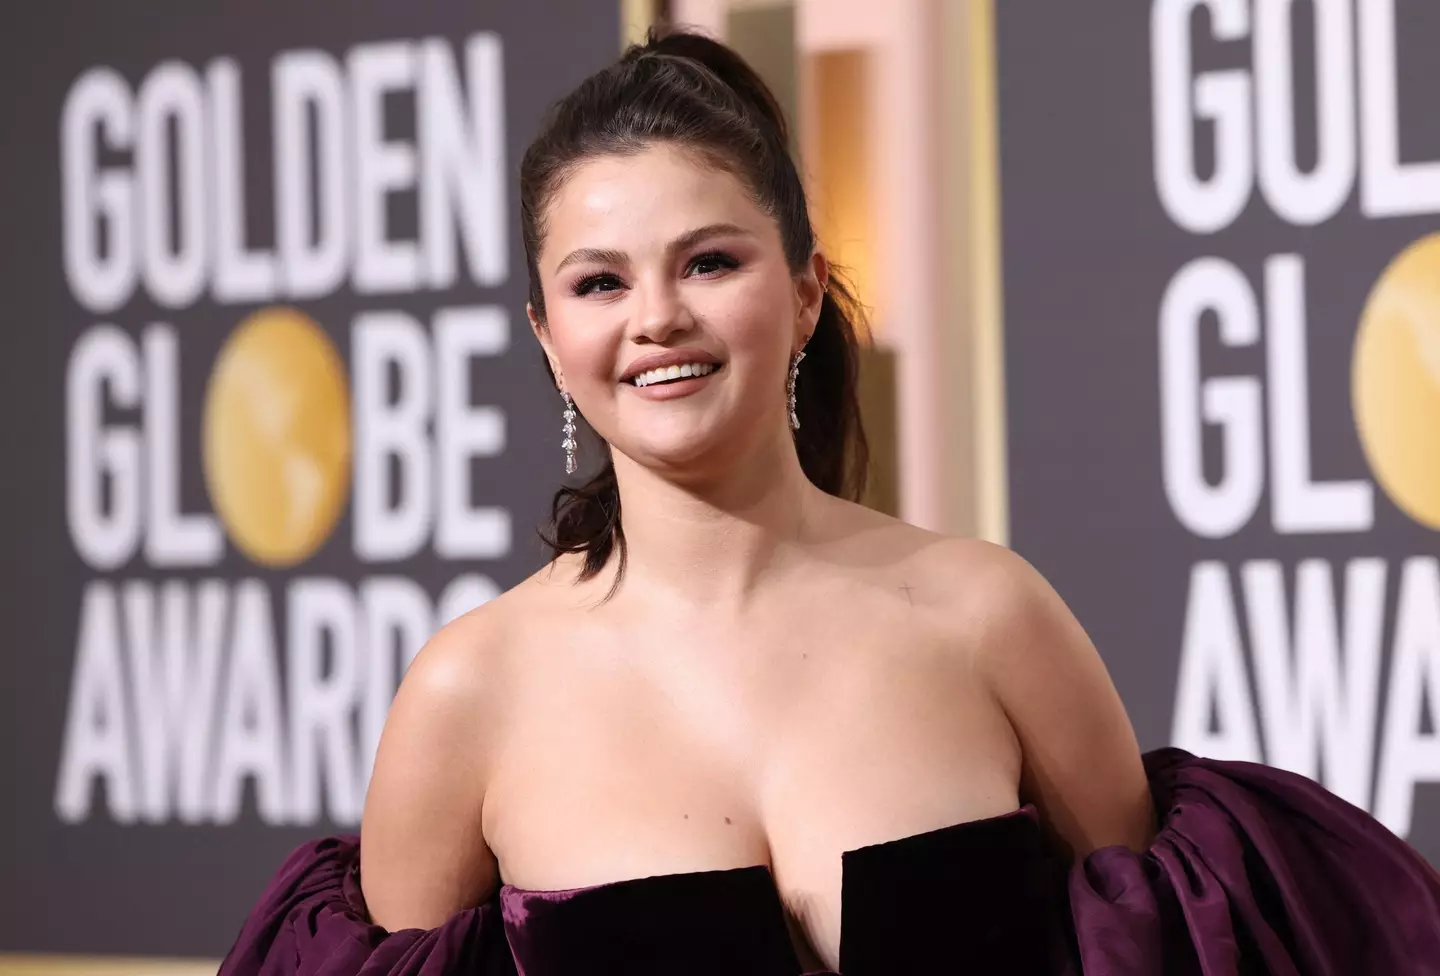 Rumors of a beef between Selena Gomez and Hailey Bieber have been reignited.